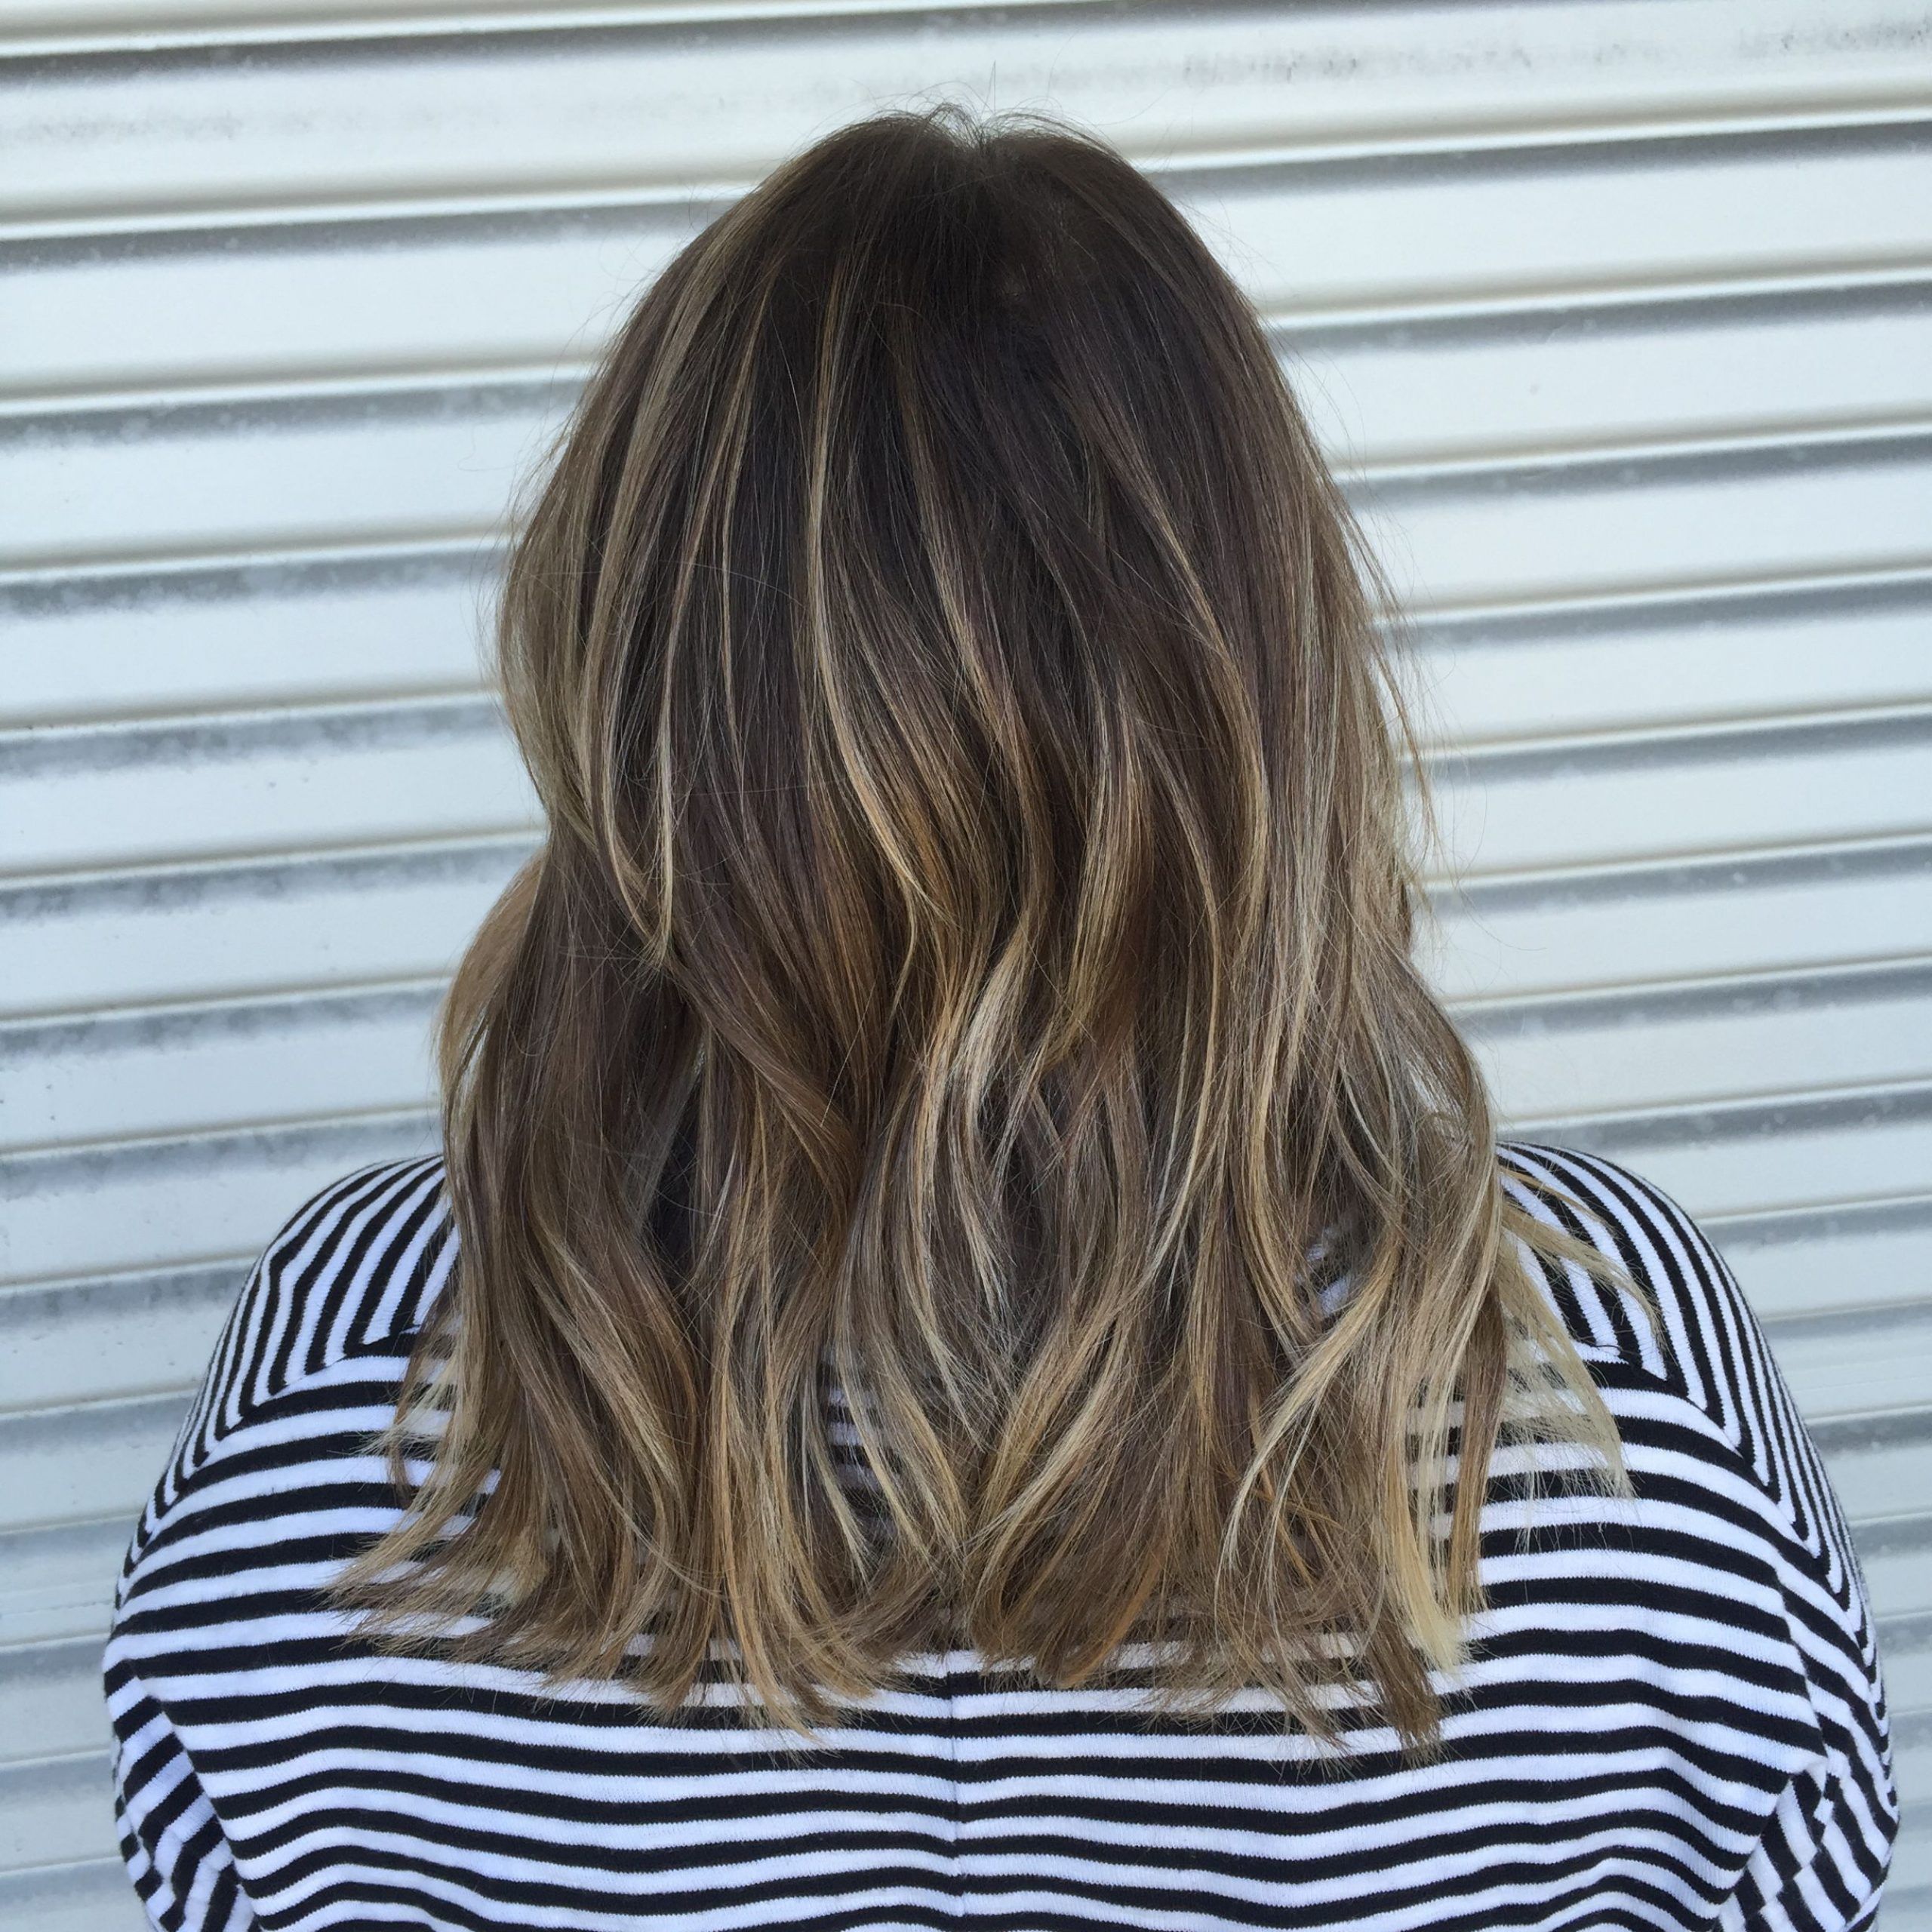 Blonde Balayage & Beachy Waves | Balayage Brunette, Blonde With Beachy Waves Hairstyles With Balayage Ombre (View 6 of 20)